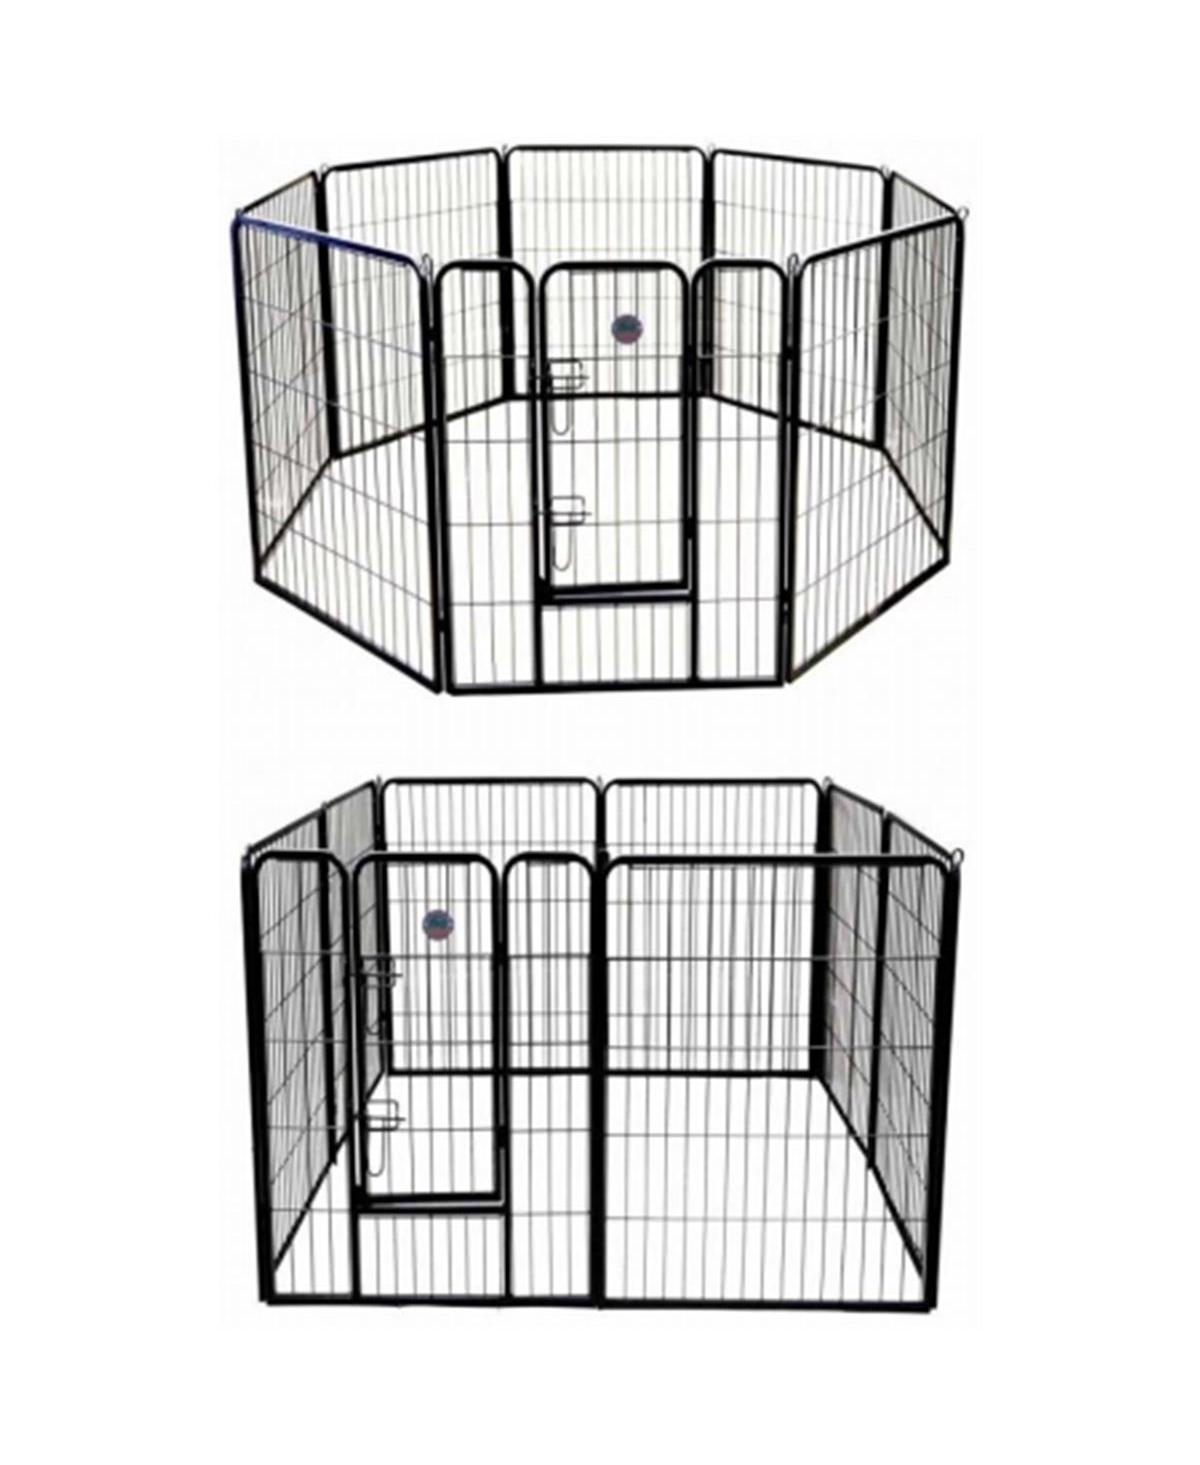 GH32 32 in. Heavy Duty Pet Play And Exercise Pen With 8 Panels - Open miscellaneous